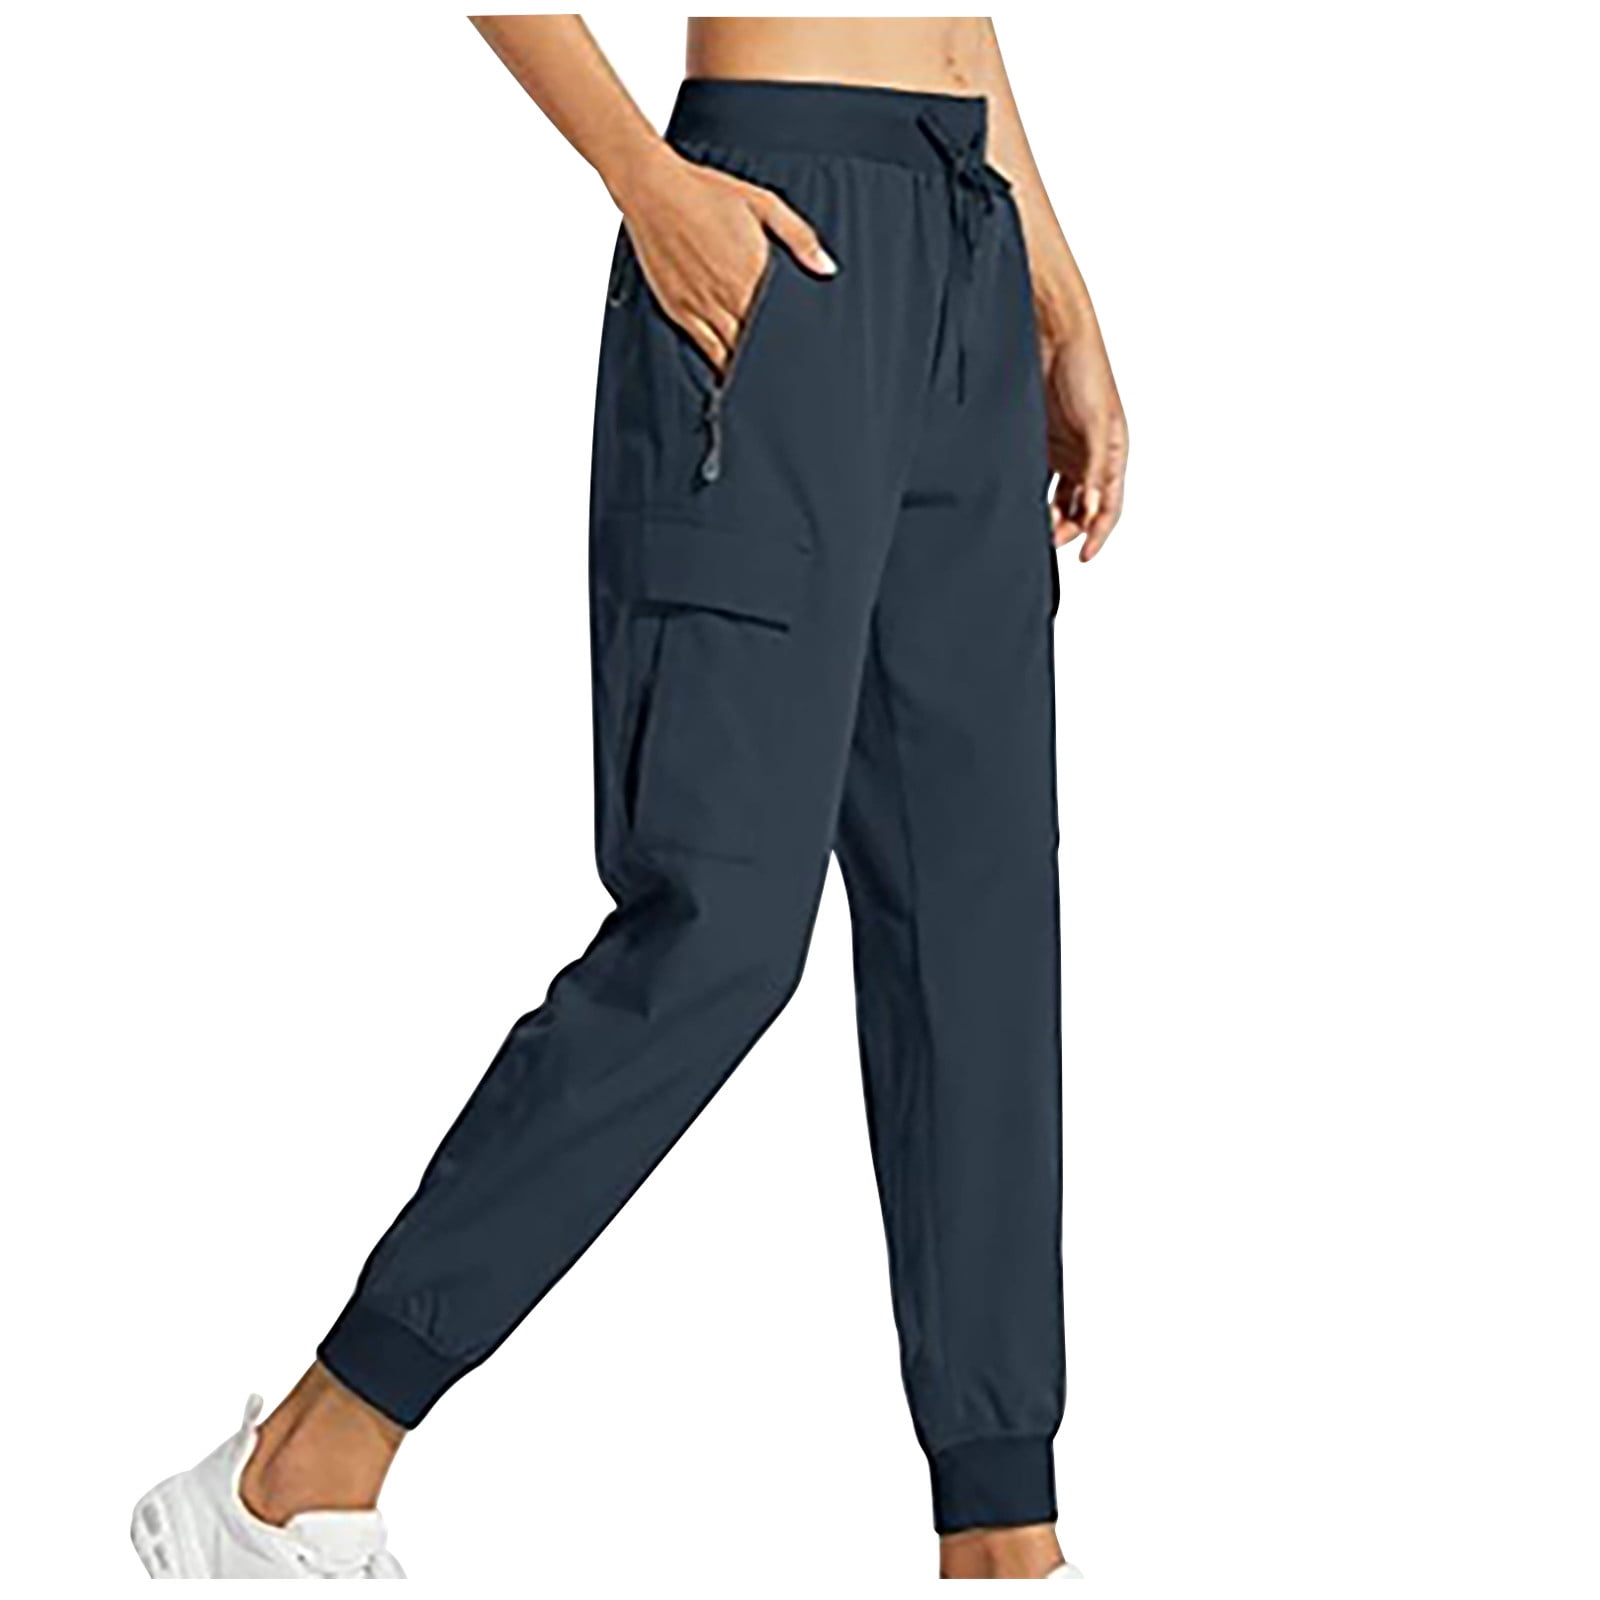 RYRJJ Women's Cargo Joggers Pant Lightweight Quick Dry Hiking Pants  Athletic Workout Lounge Casual Outdoor Track Sweatpants with Zipper  Pockets(Dark Blue,L) 